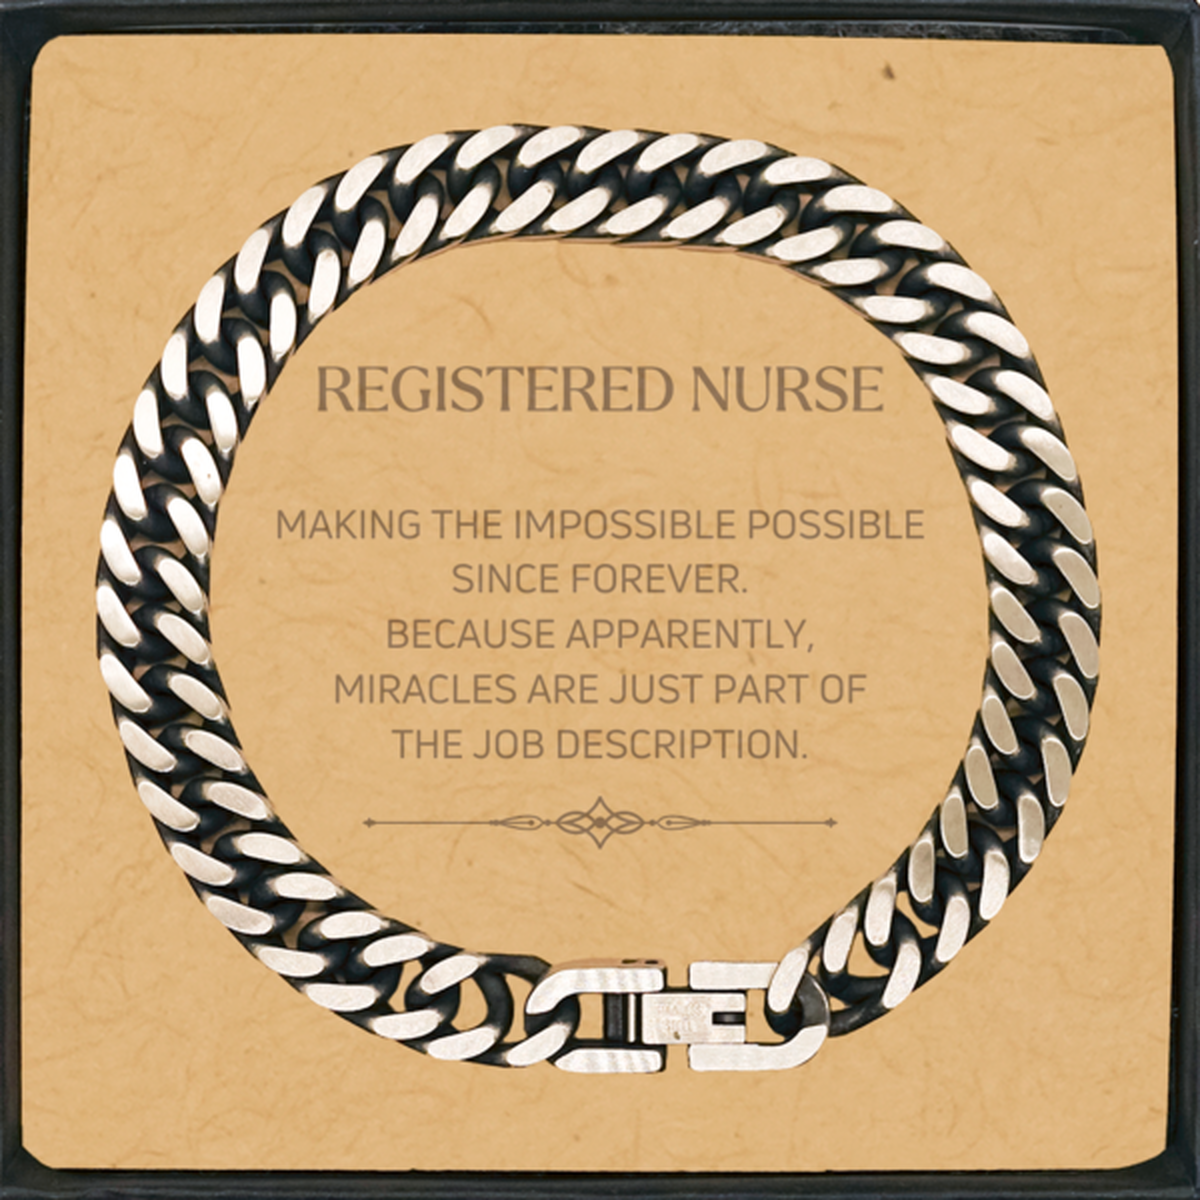 Funny Registered Nurse Gifts, Miracles are just part of the job description, Inspirational Birthday Cuban Link Chain Bracelet For Registered Nurse, Men, Women, Coworkers, Friends, Boss